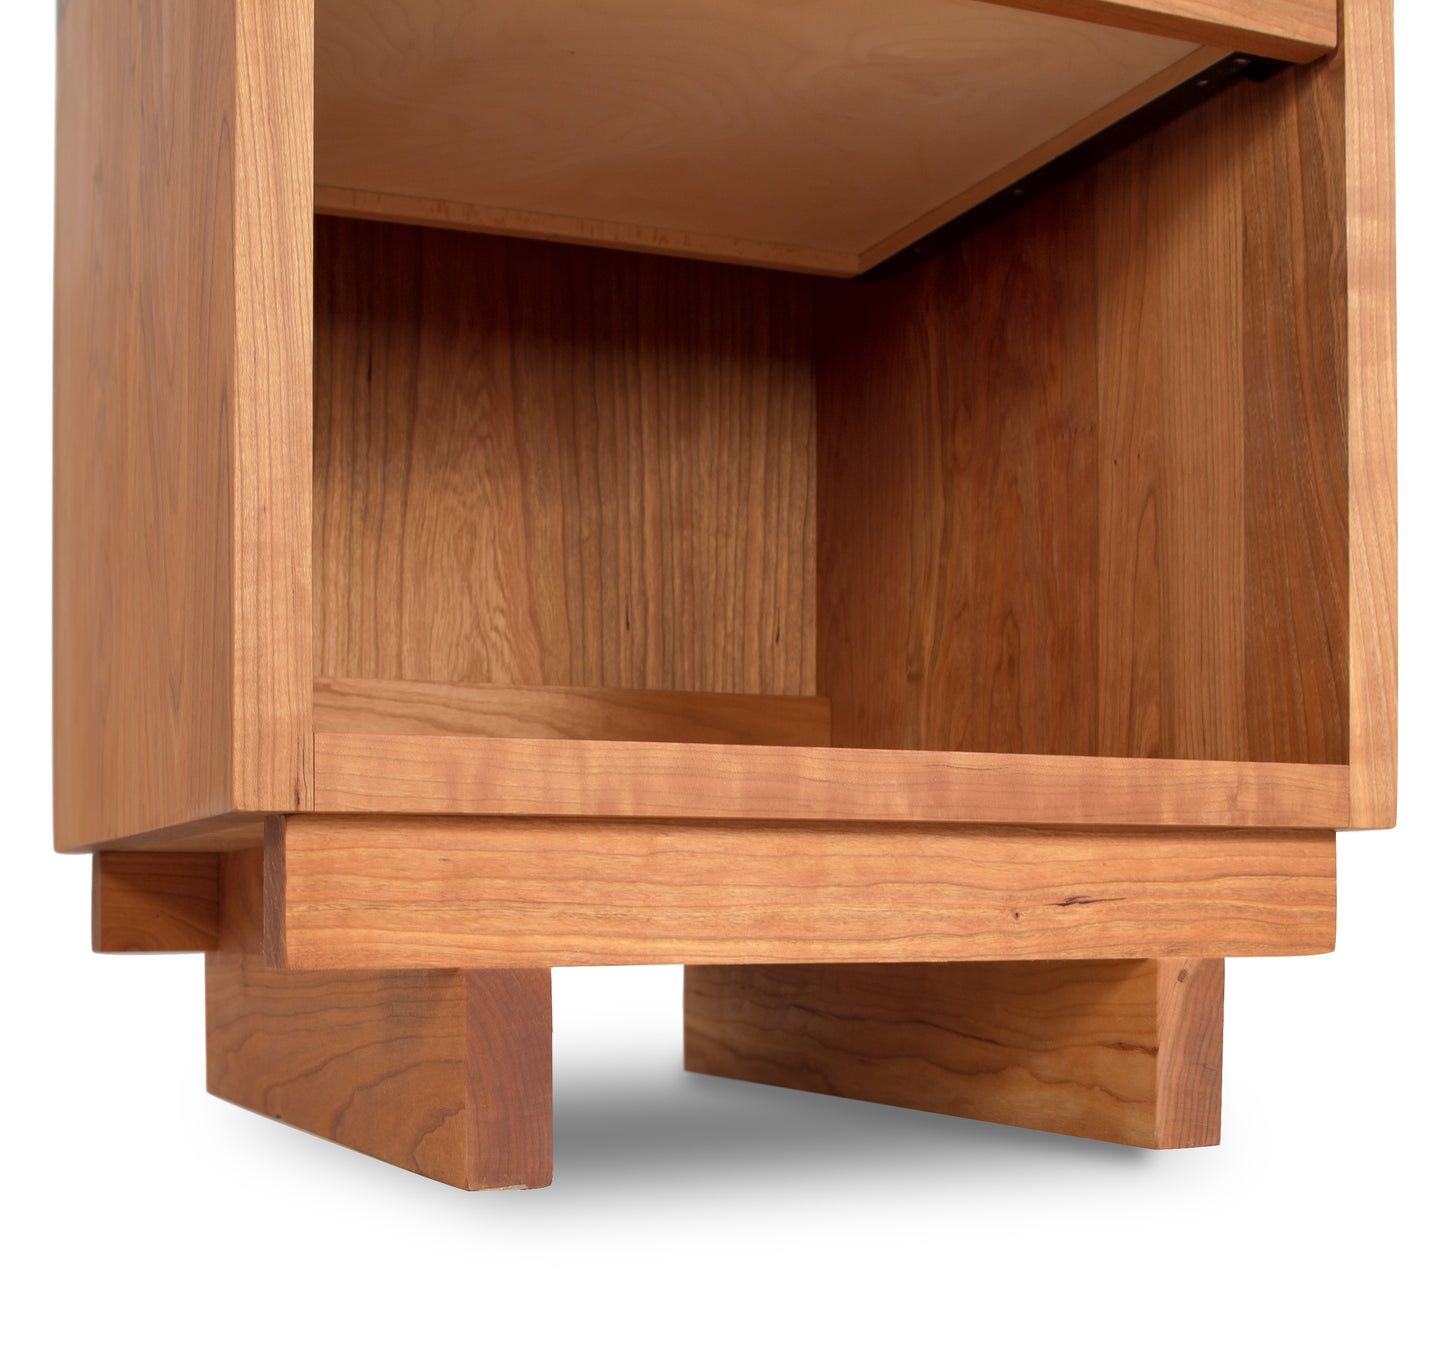 A modern Vermont Furniture Designs wooden Loft 1-Drawer Enclosed Shelf Nightstand with two drawers and a shelf.